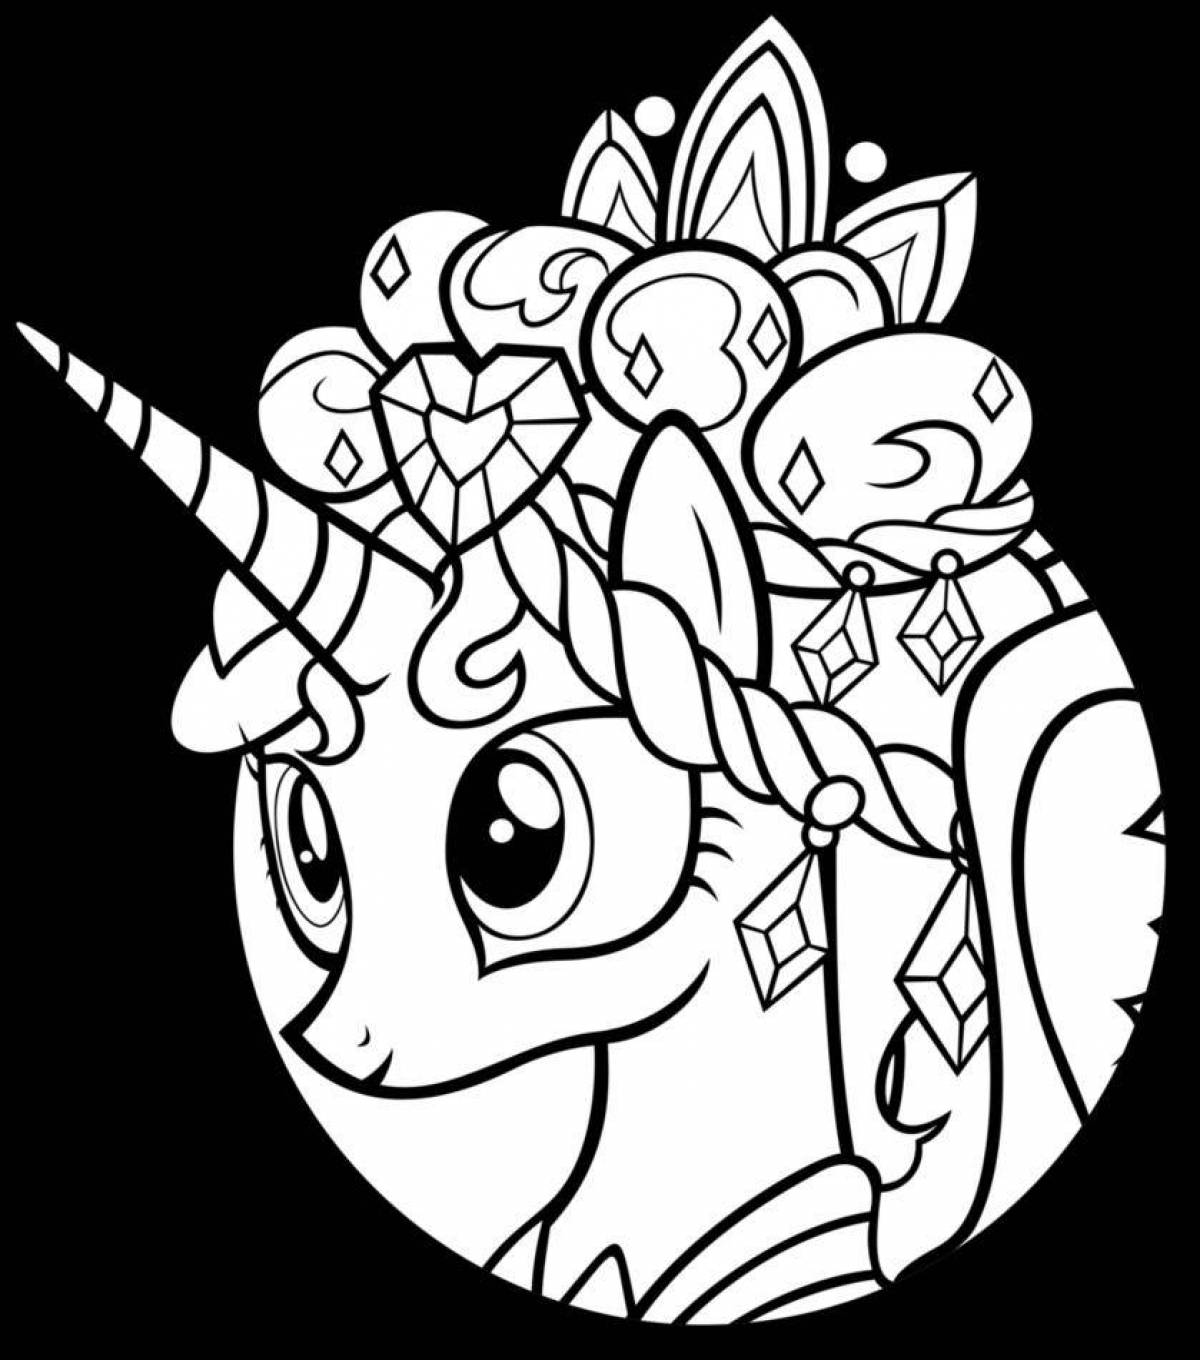 Colorful cadence coloring page